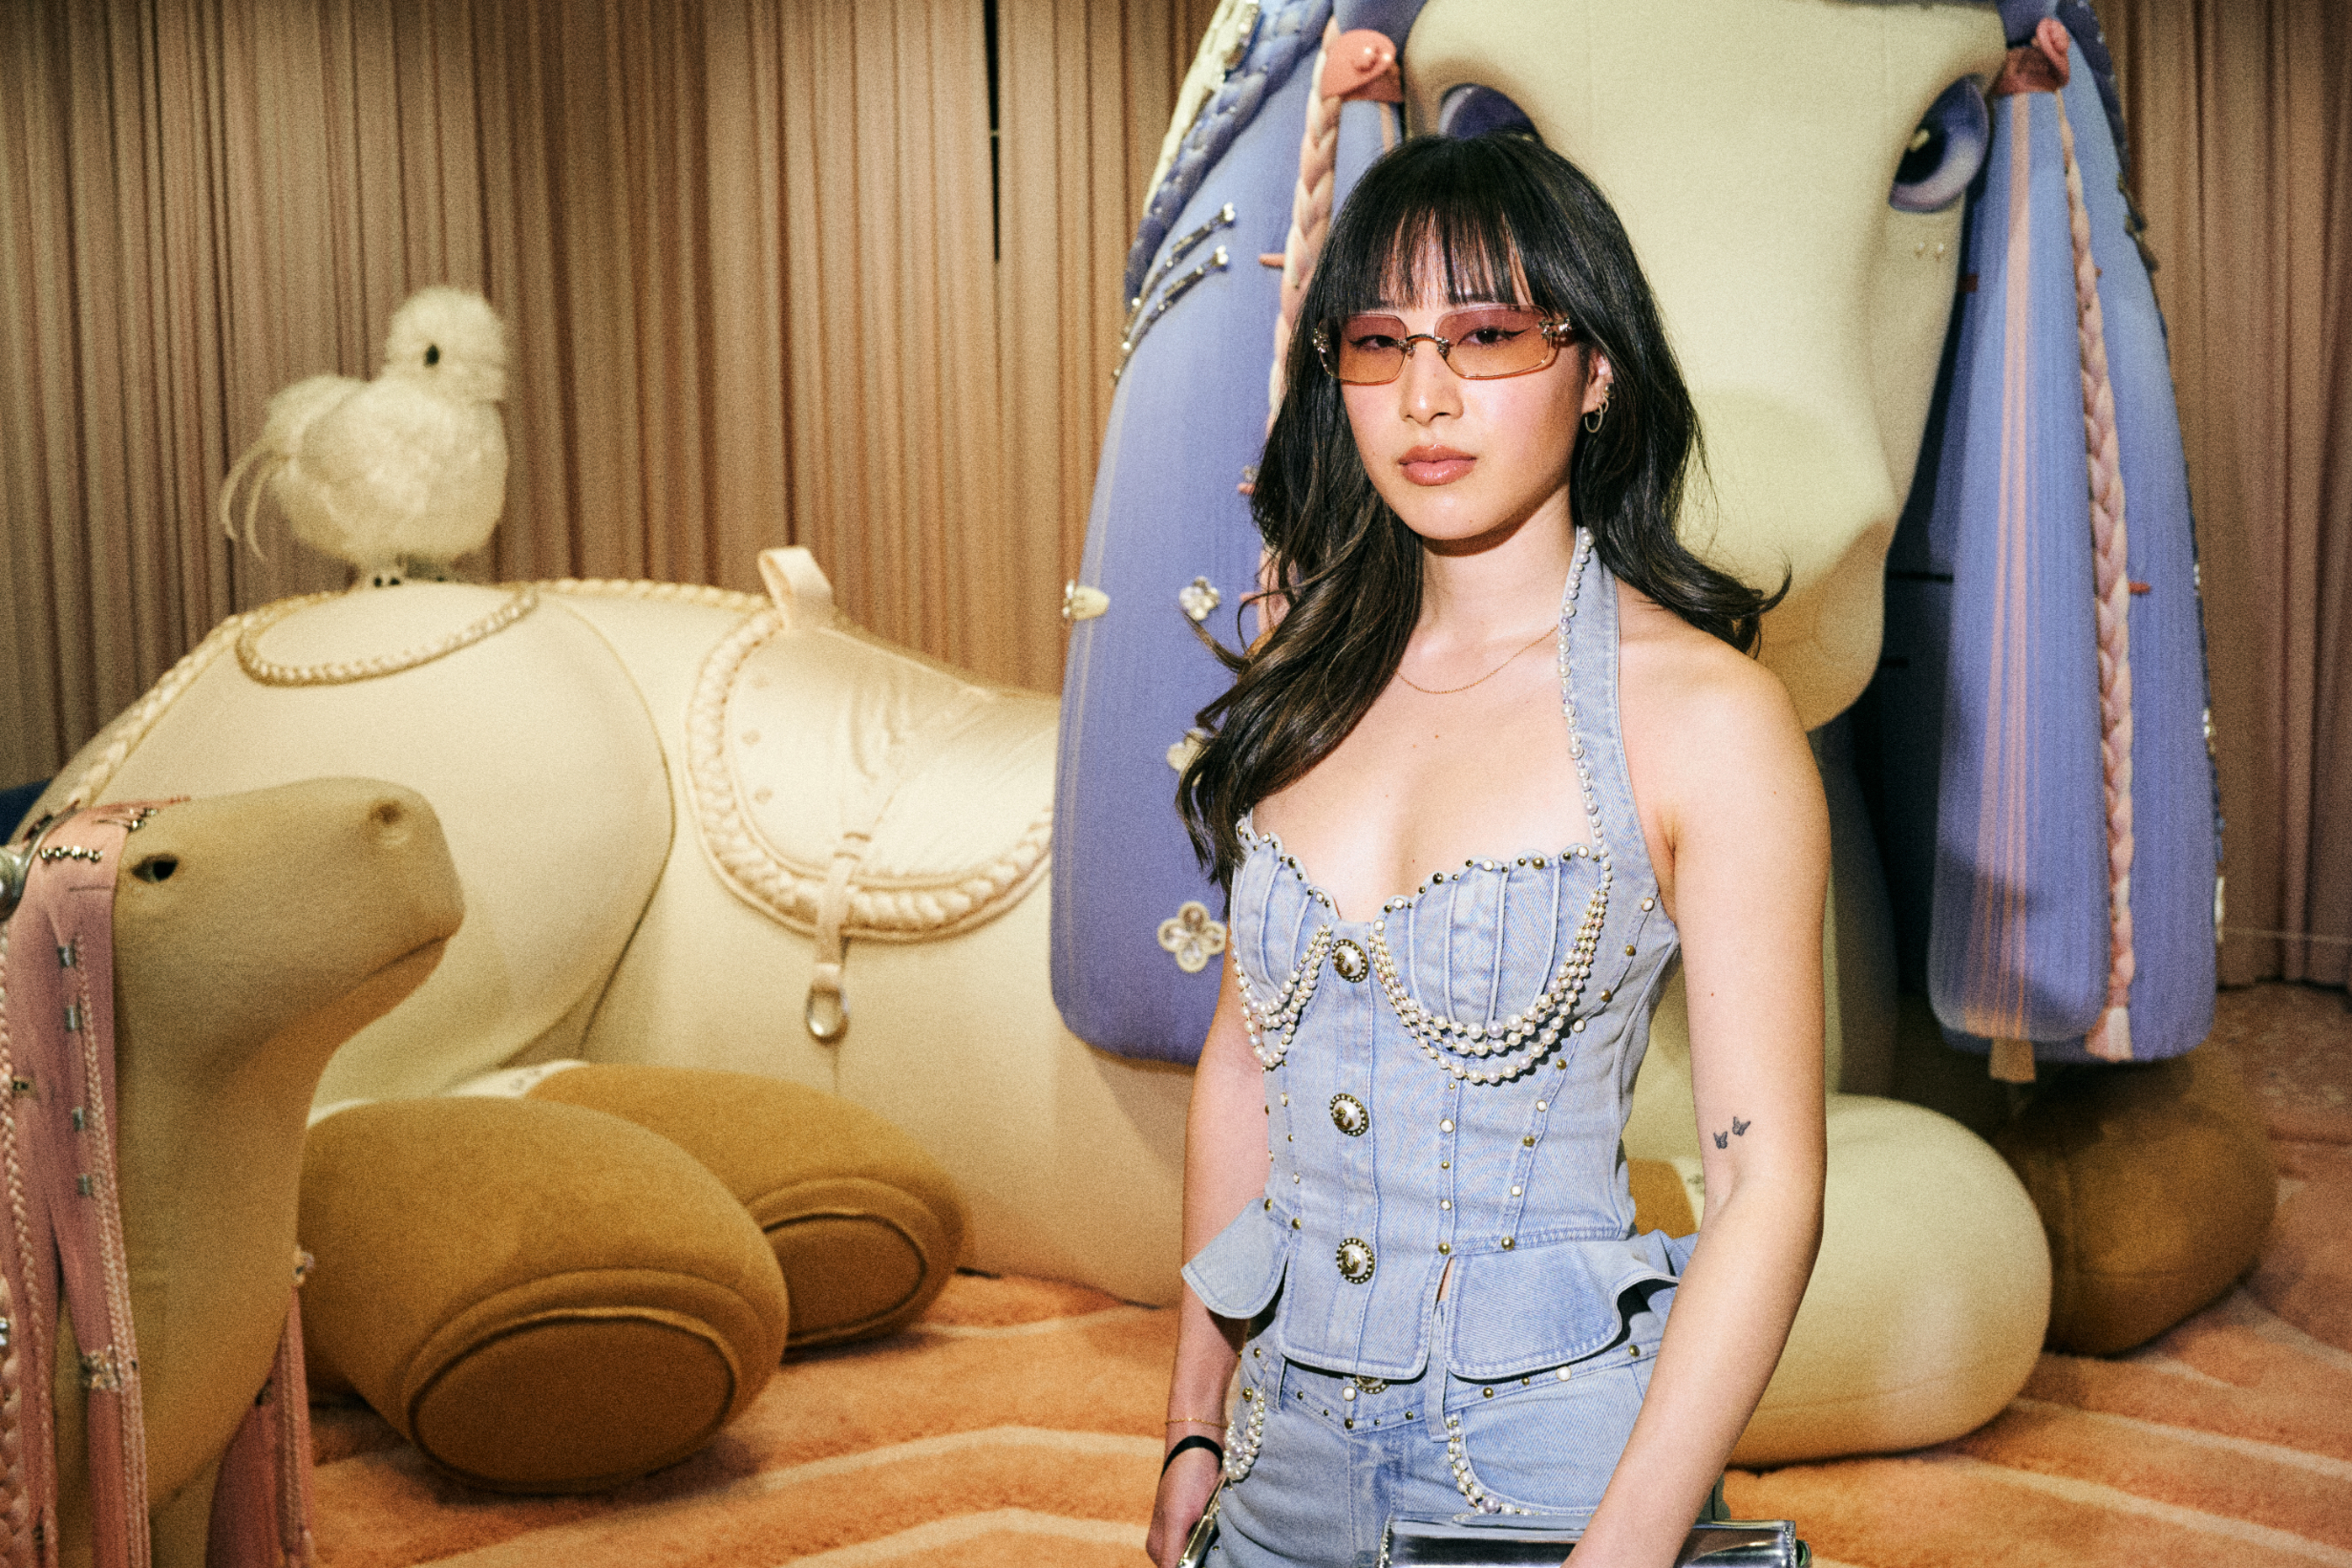 Woman in denim bustier outfit with decorative chains, posing with whimsical animal sculptures